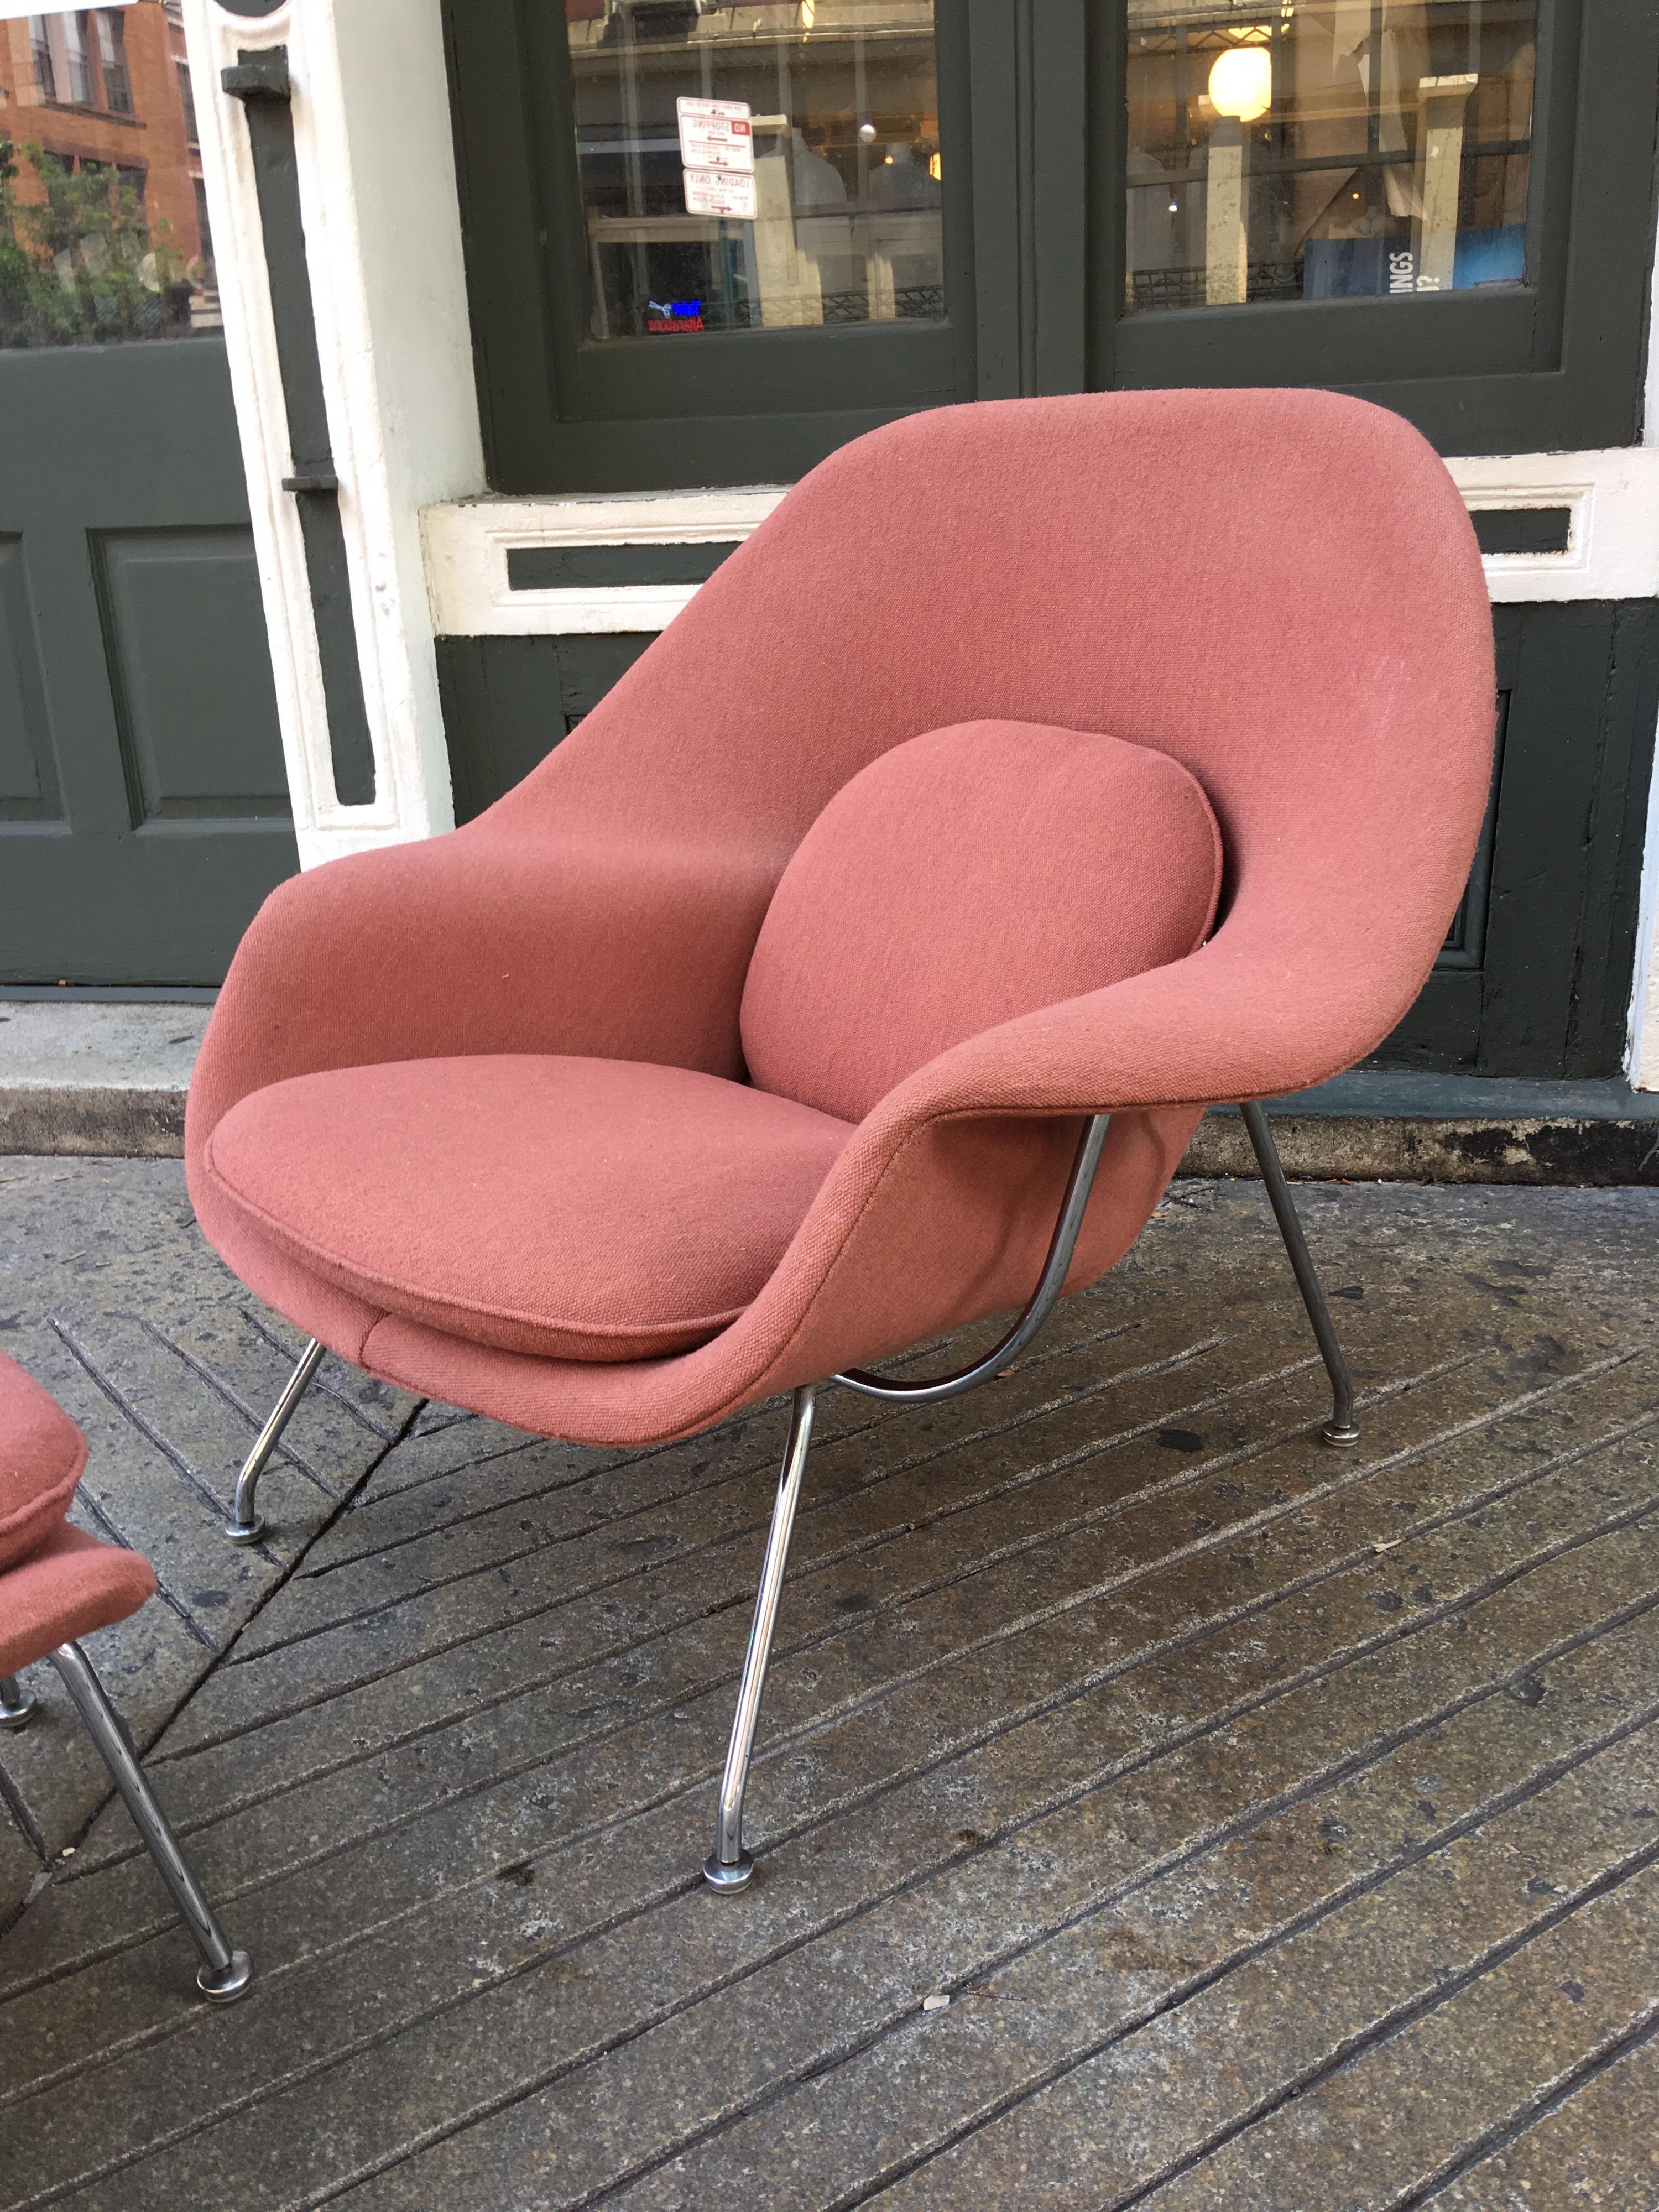 Saarinen for Knoll Womb chair and ottoman, probably recovered 15-20 years ago. Foam is still good, chair sits well. A little chrome pitting on front left leg see photo. Upholstery services available.